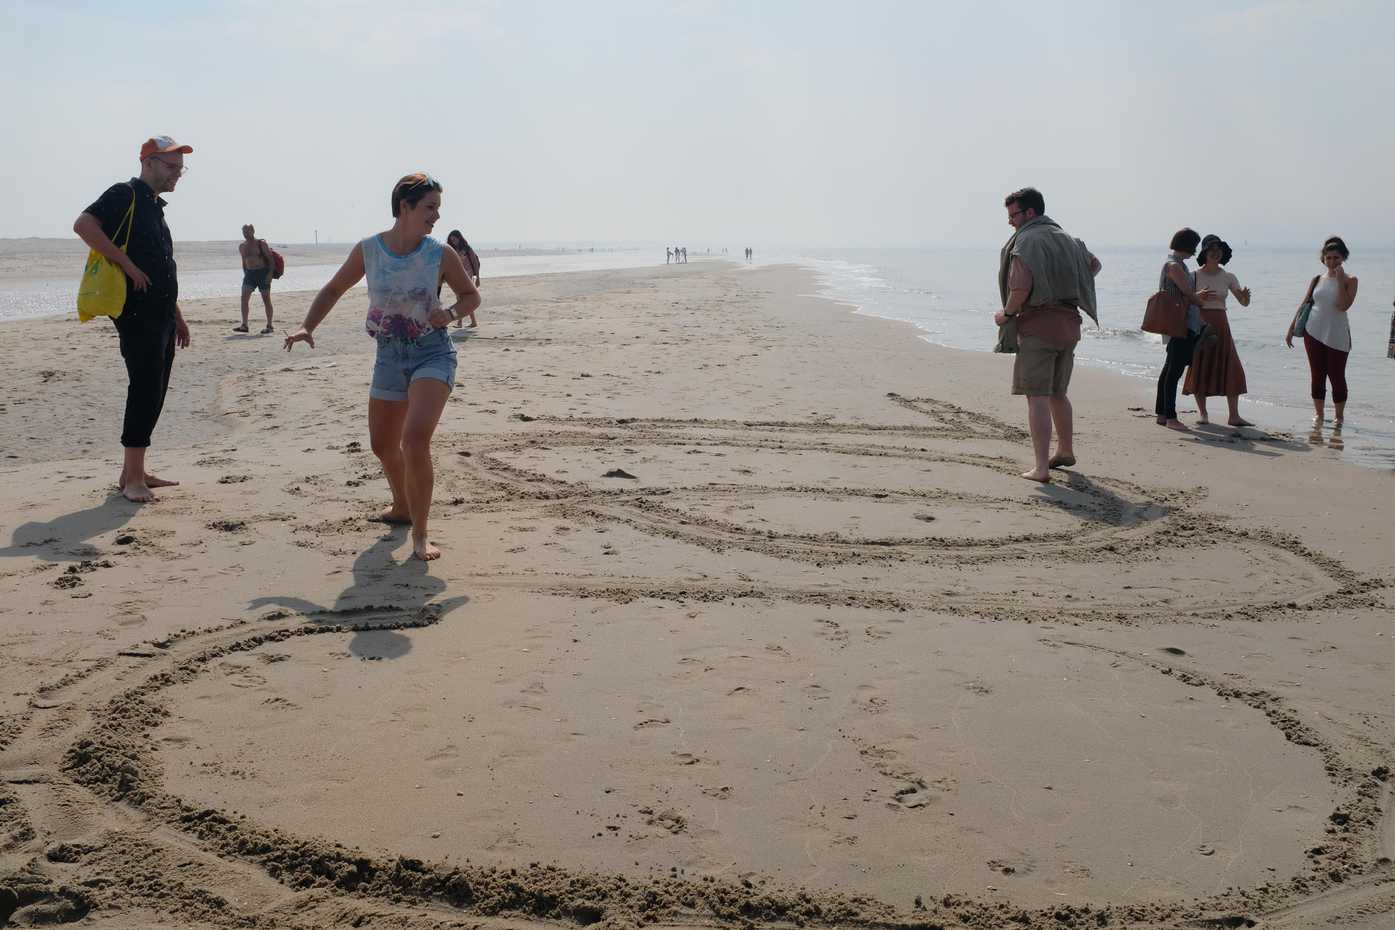 Drawing big letters in the sand. Cool.